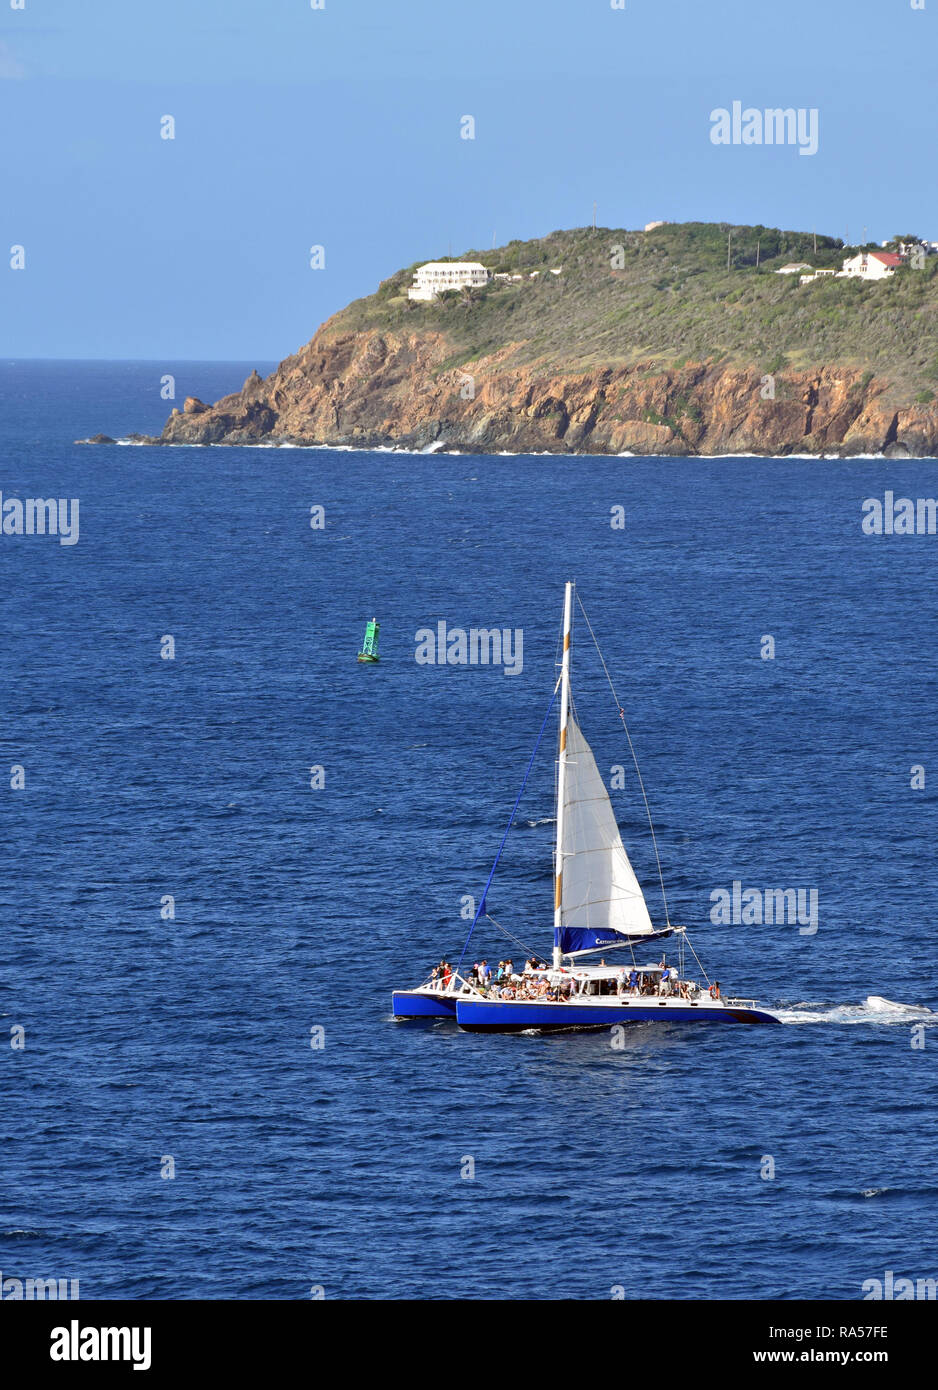 catamaran with passengers near Caribbean island surrounded by blue water Stock Photo